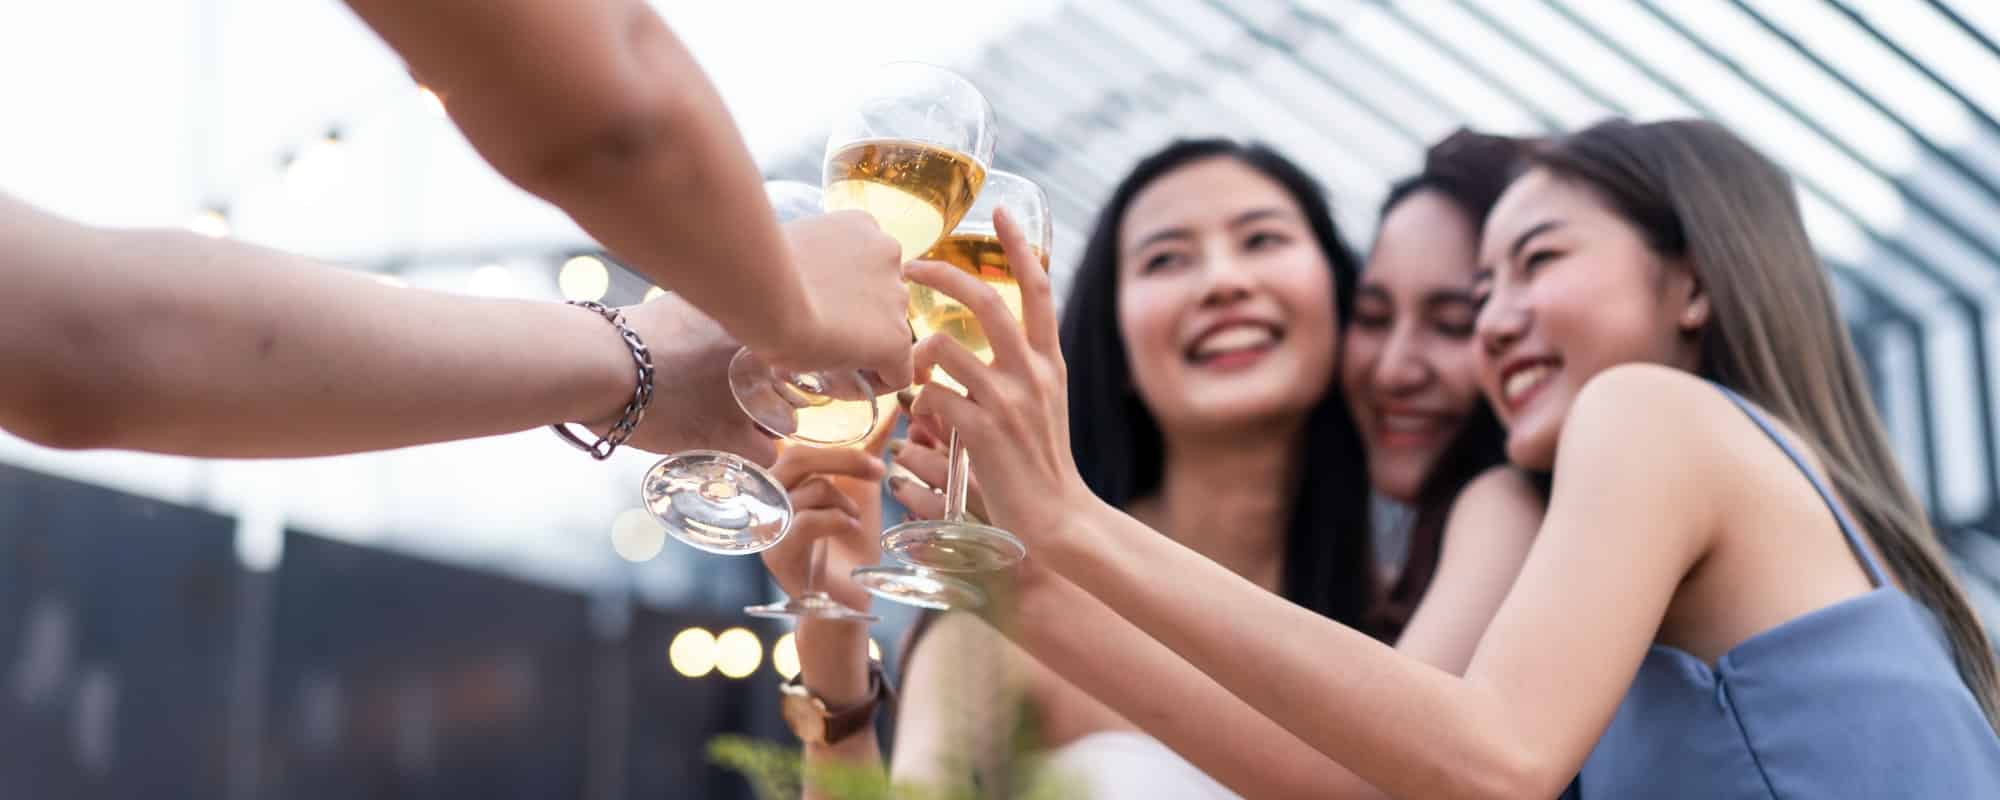 group of asian woman friends drinking beer alcohol having party at rooftop restaurant